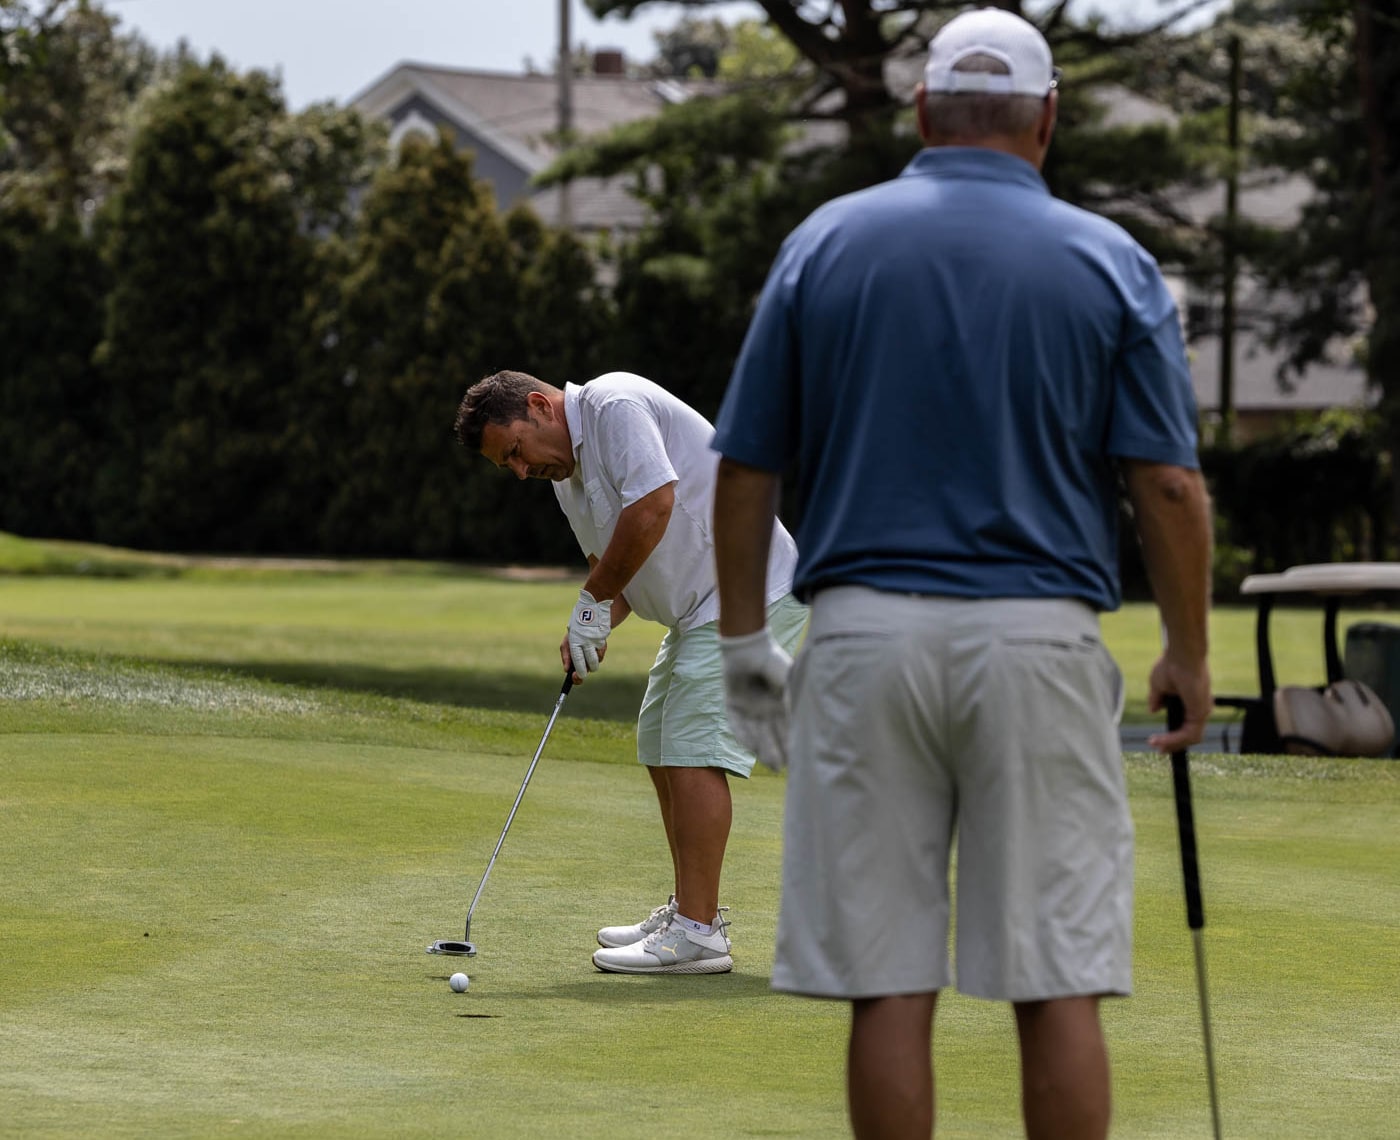 Country-Club-Of-New-Bedford FB-2023-Mens-FB-Gallery August-2023-Country-Club-Of-New-Bedford-FB-2023-Mens-FB-Gallery August-2023-Mens-FB-Gallery-Sunday-Photos-Image-10